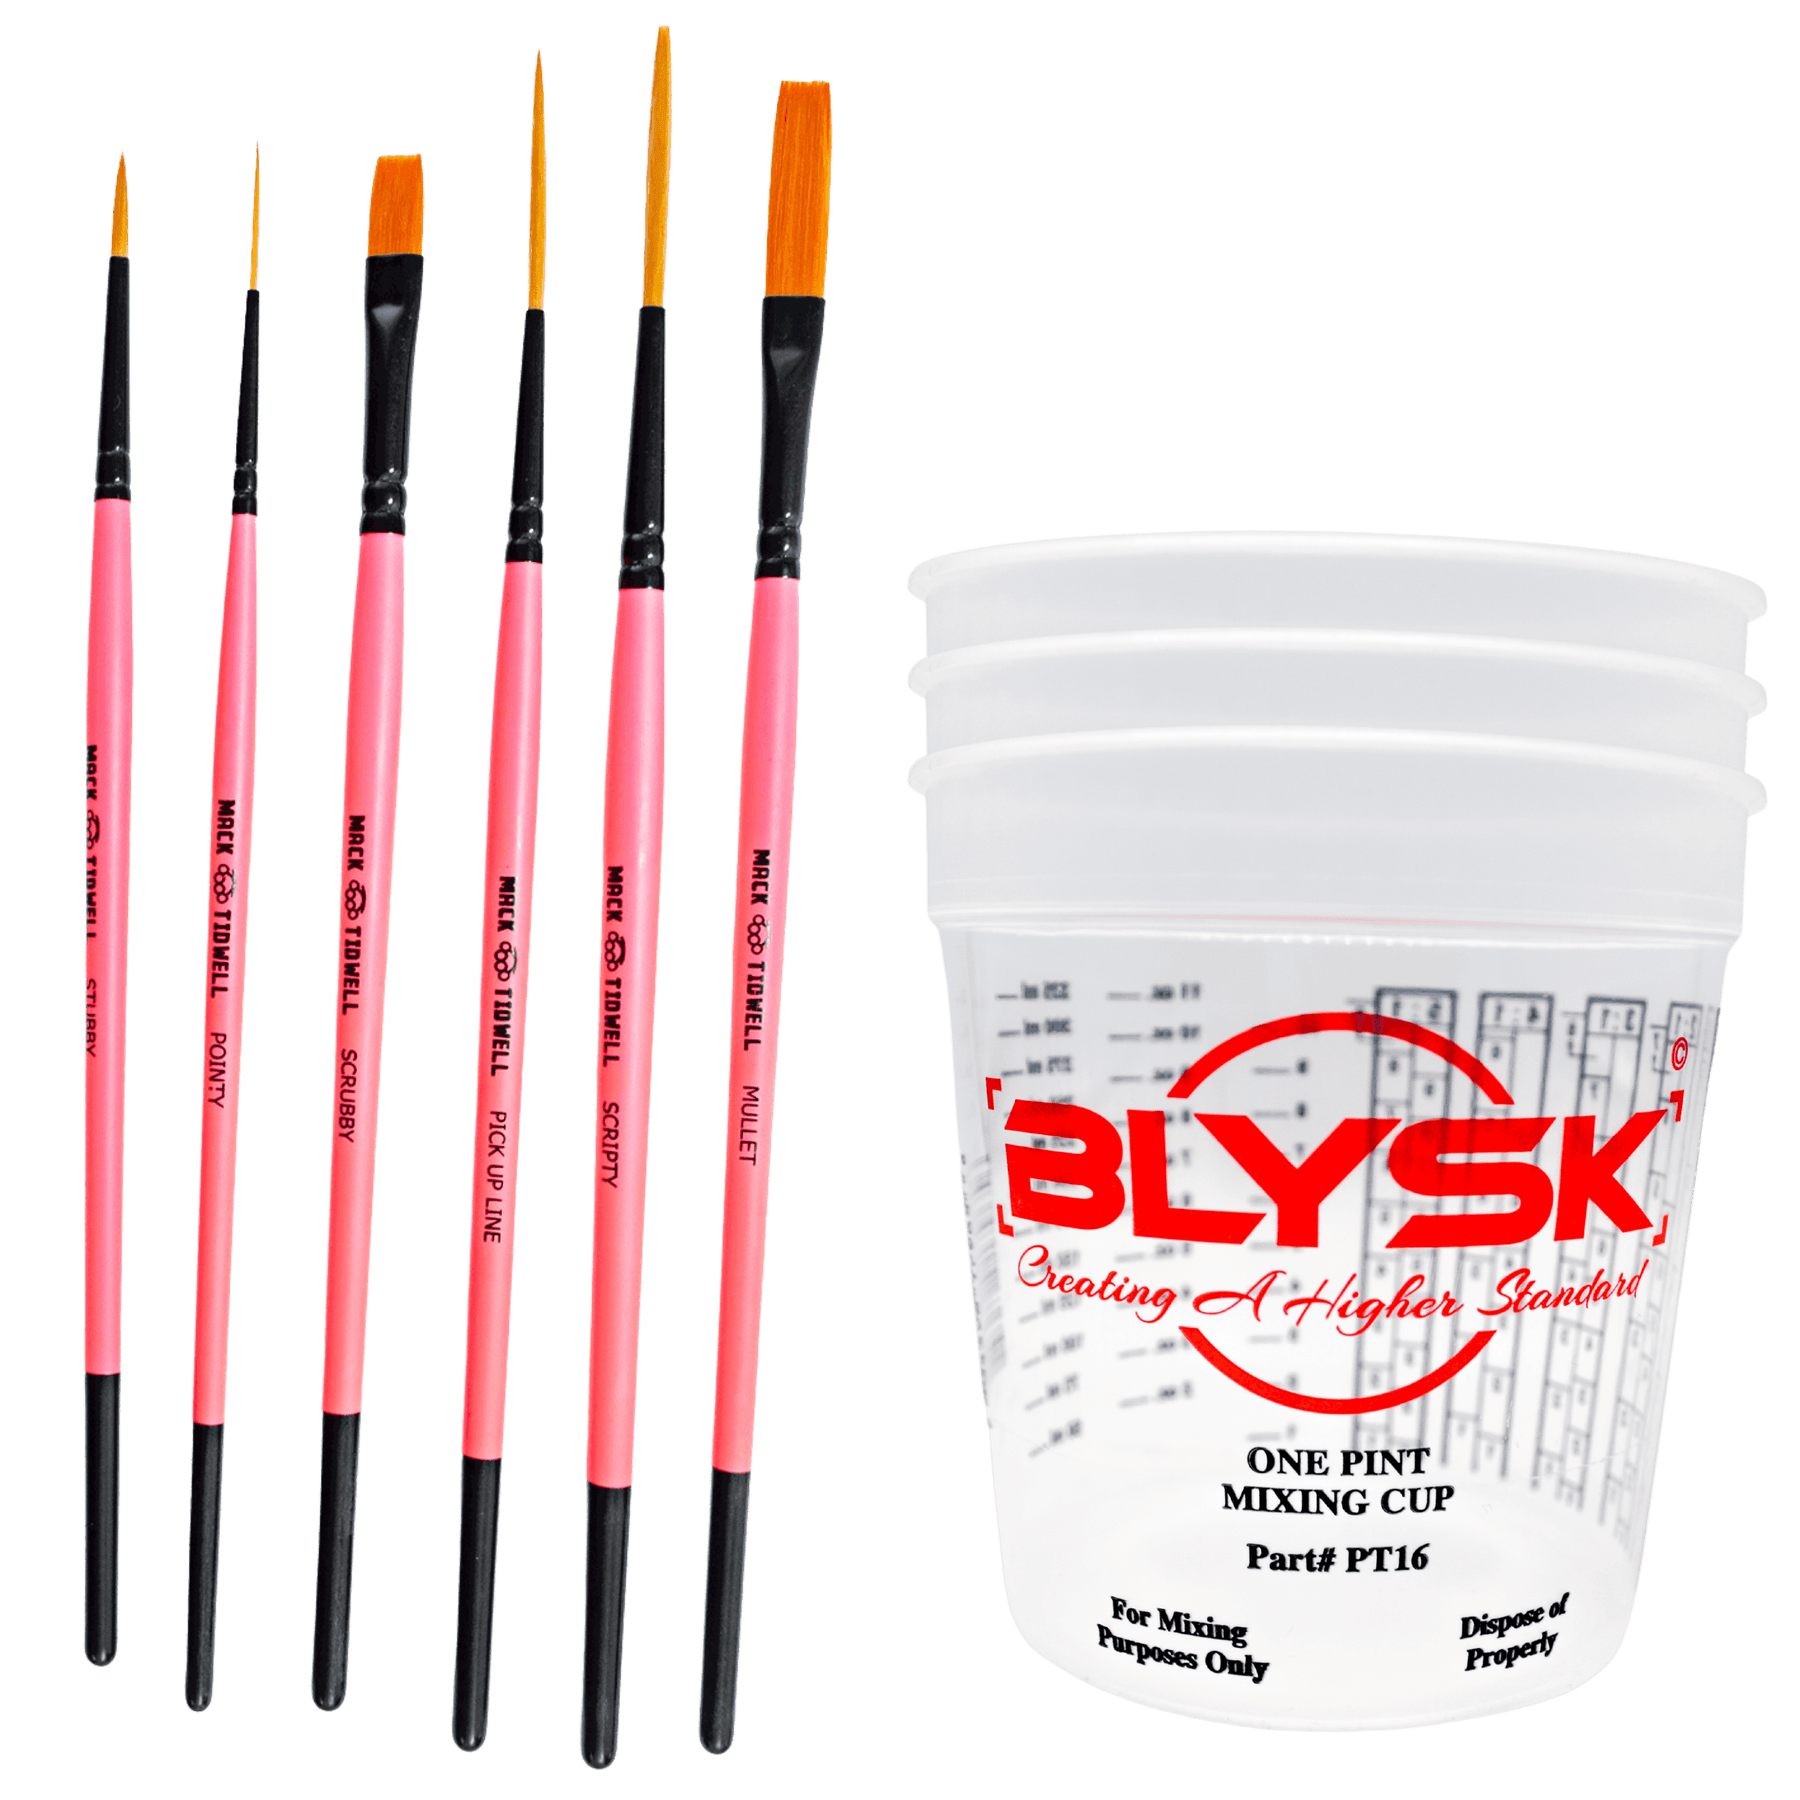 BLYSK and Mack M/T Broken Pinkies Set Striper, outliner, and scroller Brush Bundle with Free Pint Mixing Cups Set, Scrolling, pinstriping, Art (6, Mullet,Scrubby,Scripty,PickUpLine,Pointy,Stubby) - Maazzo